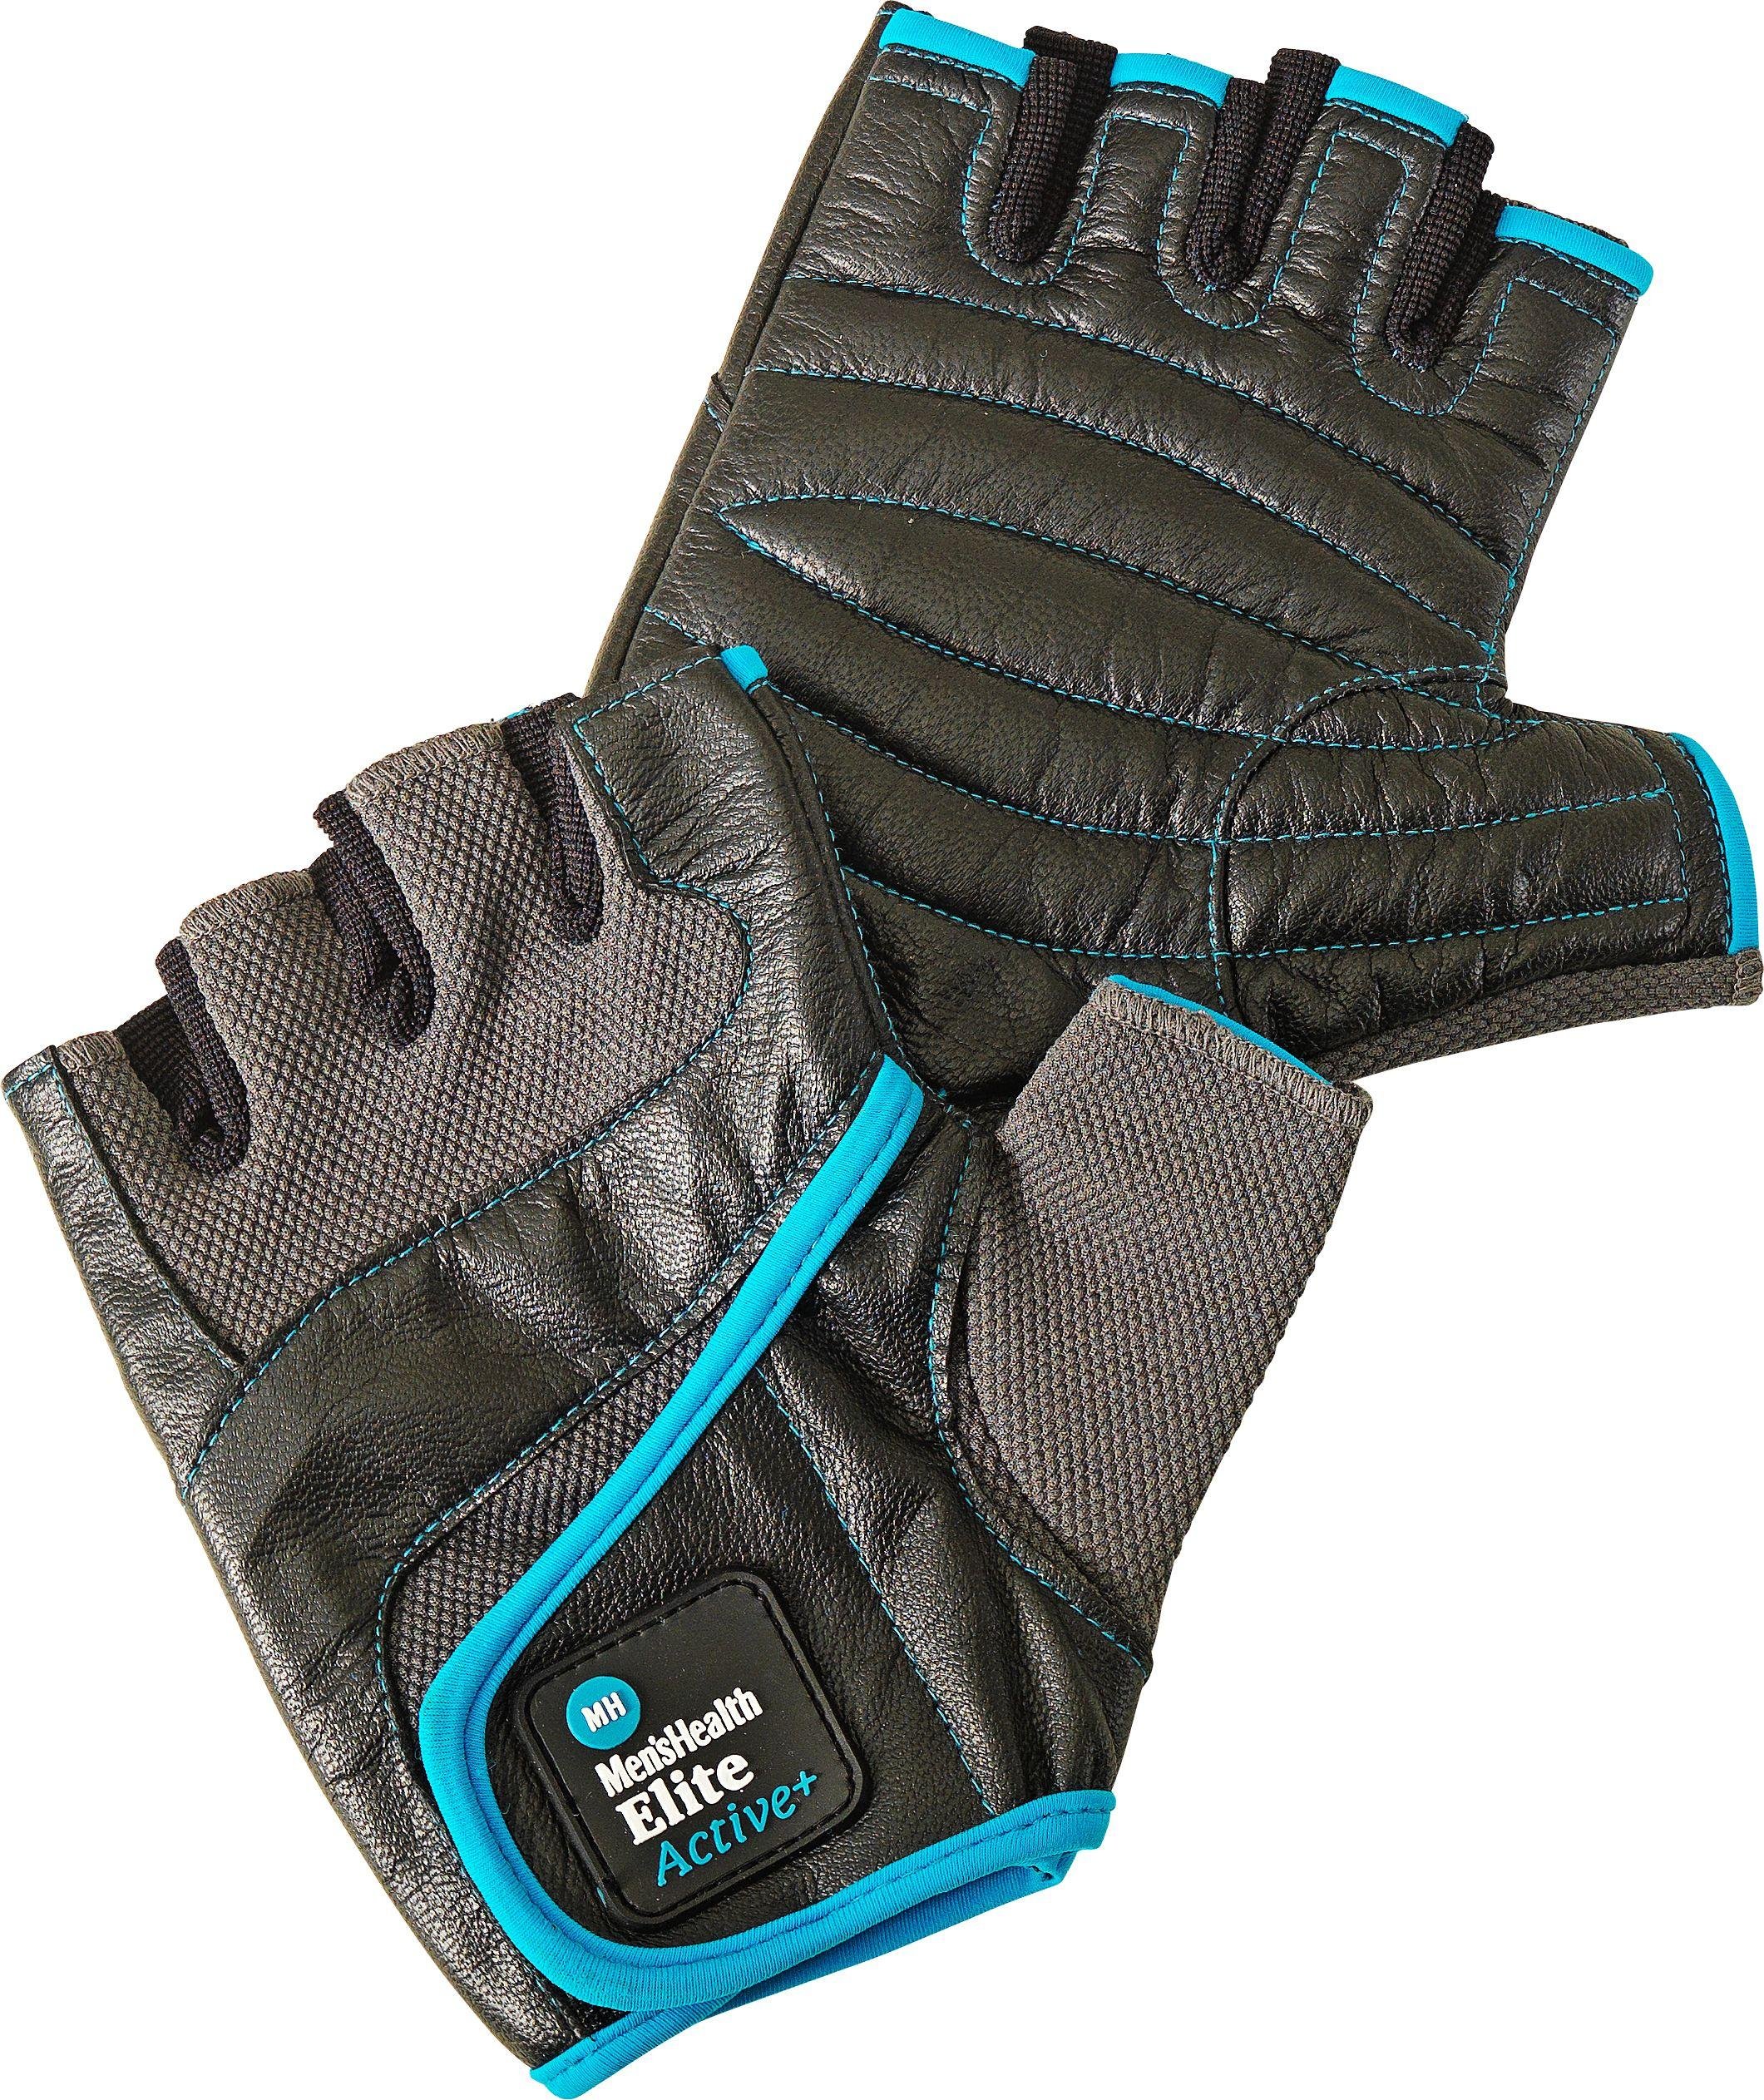 Men's Health Weight Lifting Gloves - Large